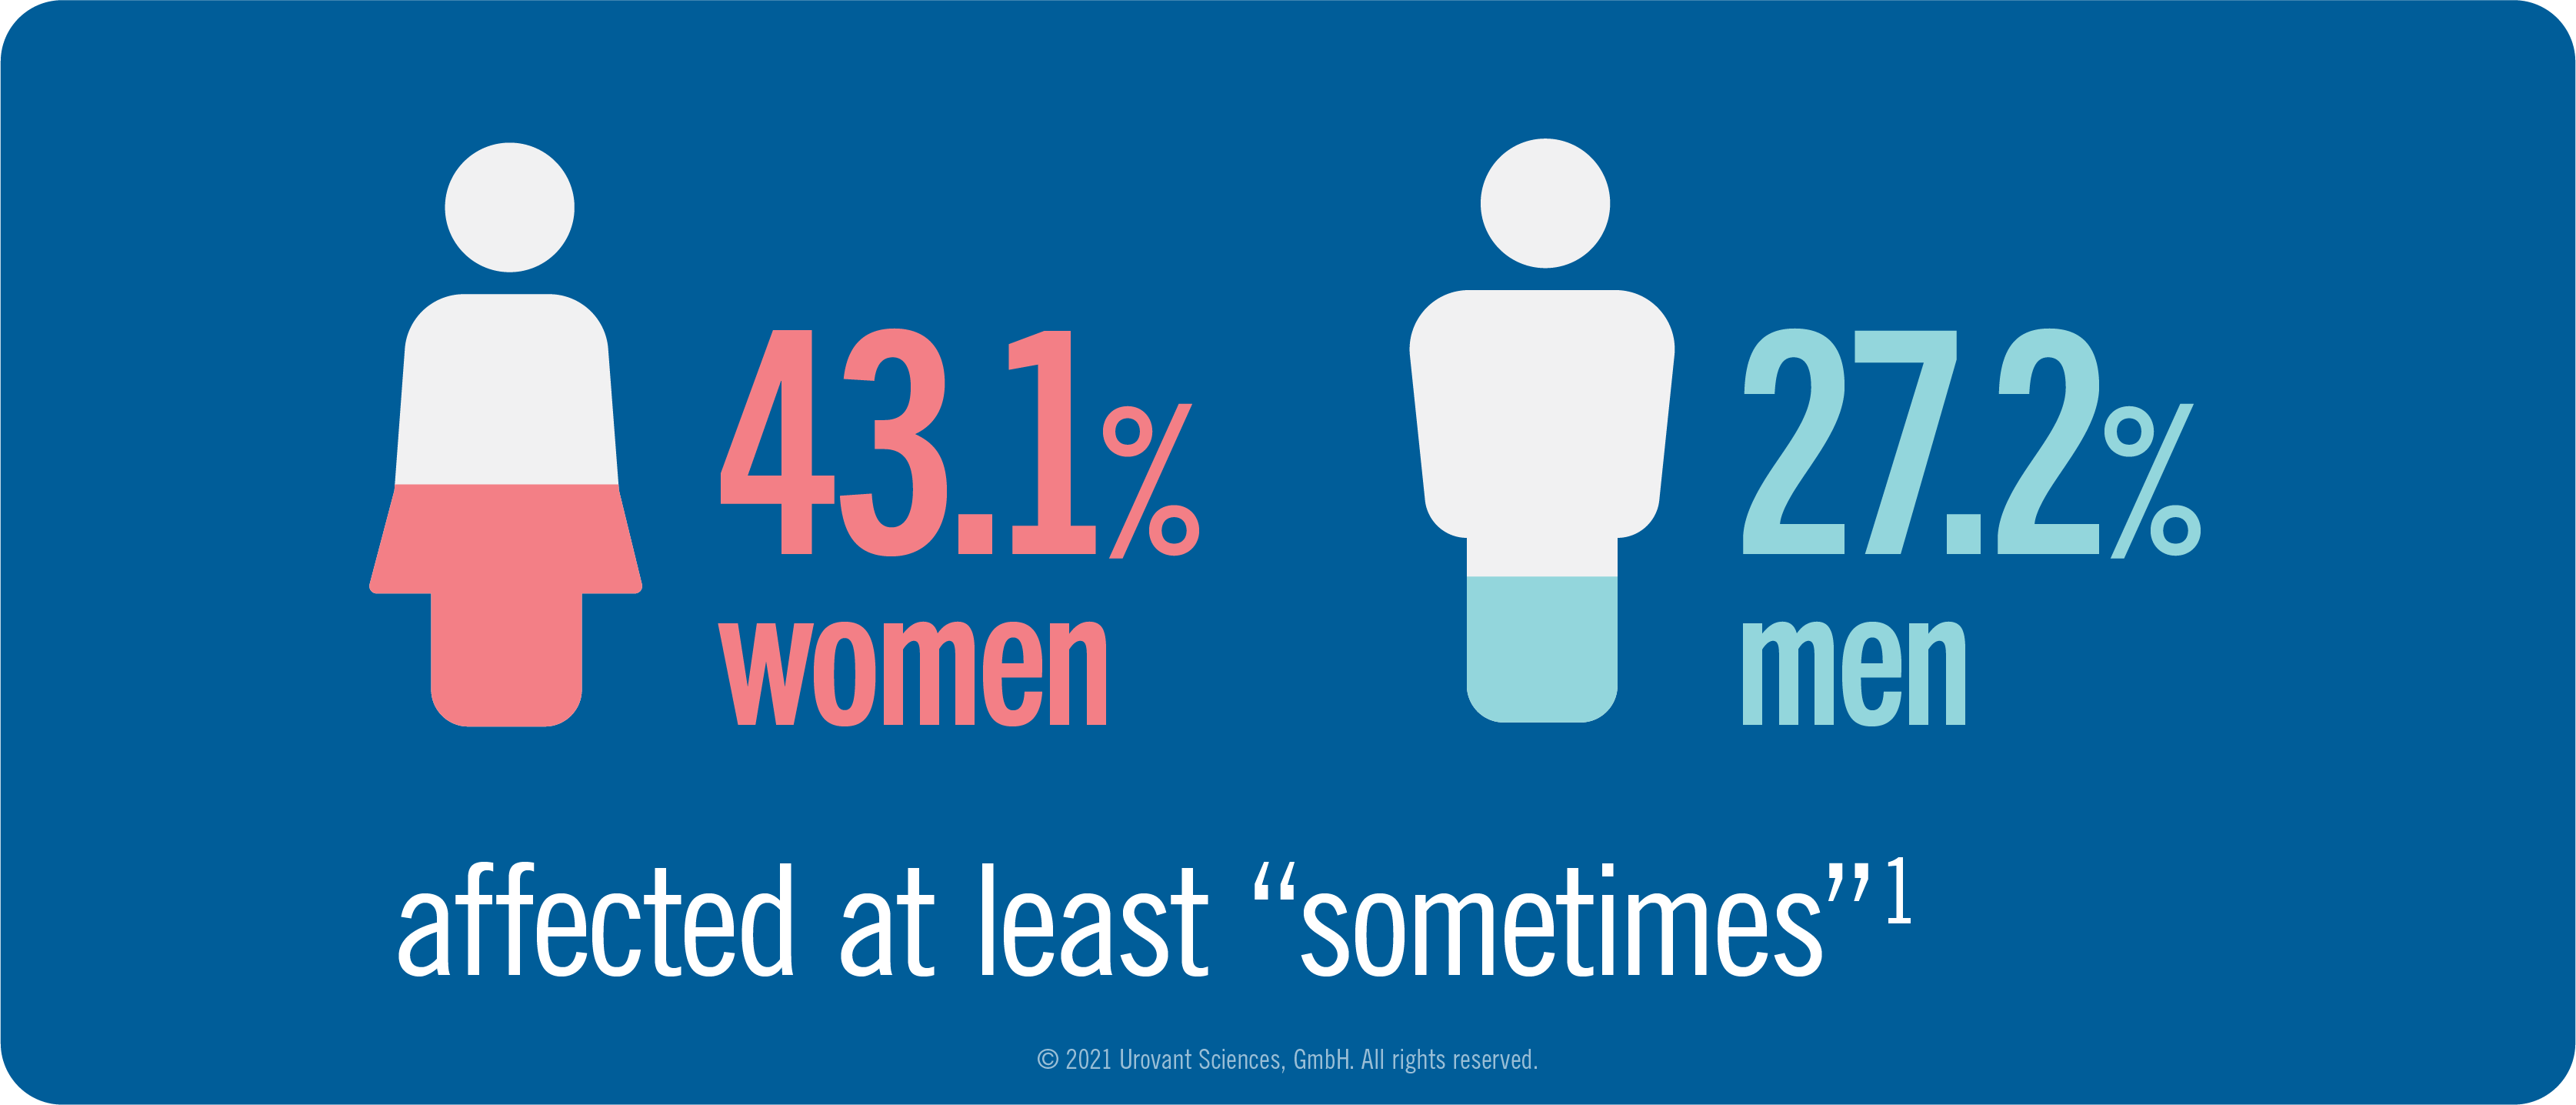 Infographic of percentage of woman and menaffected at least sometimes by overactive bladder symptoms